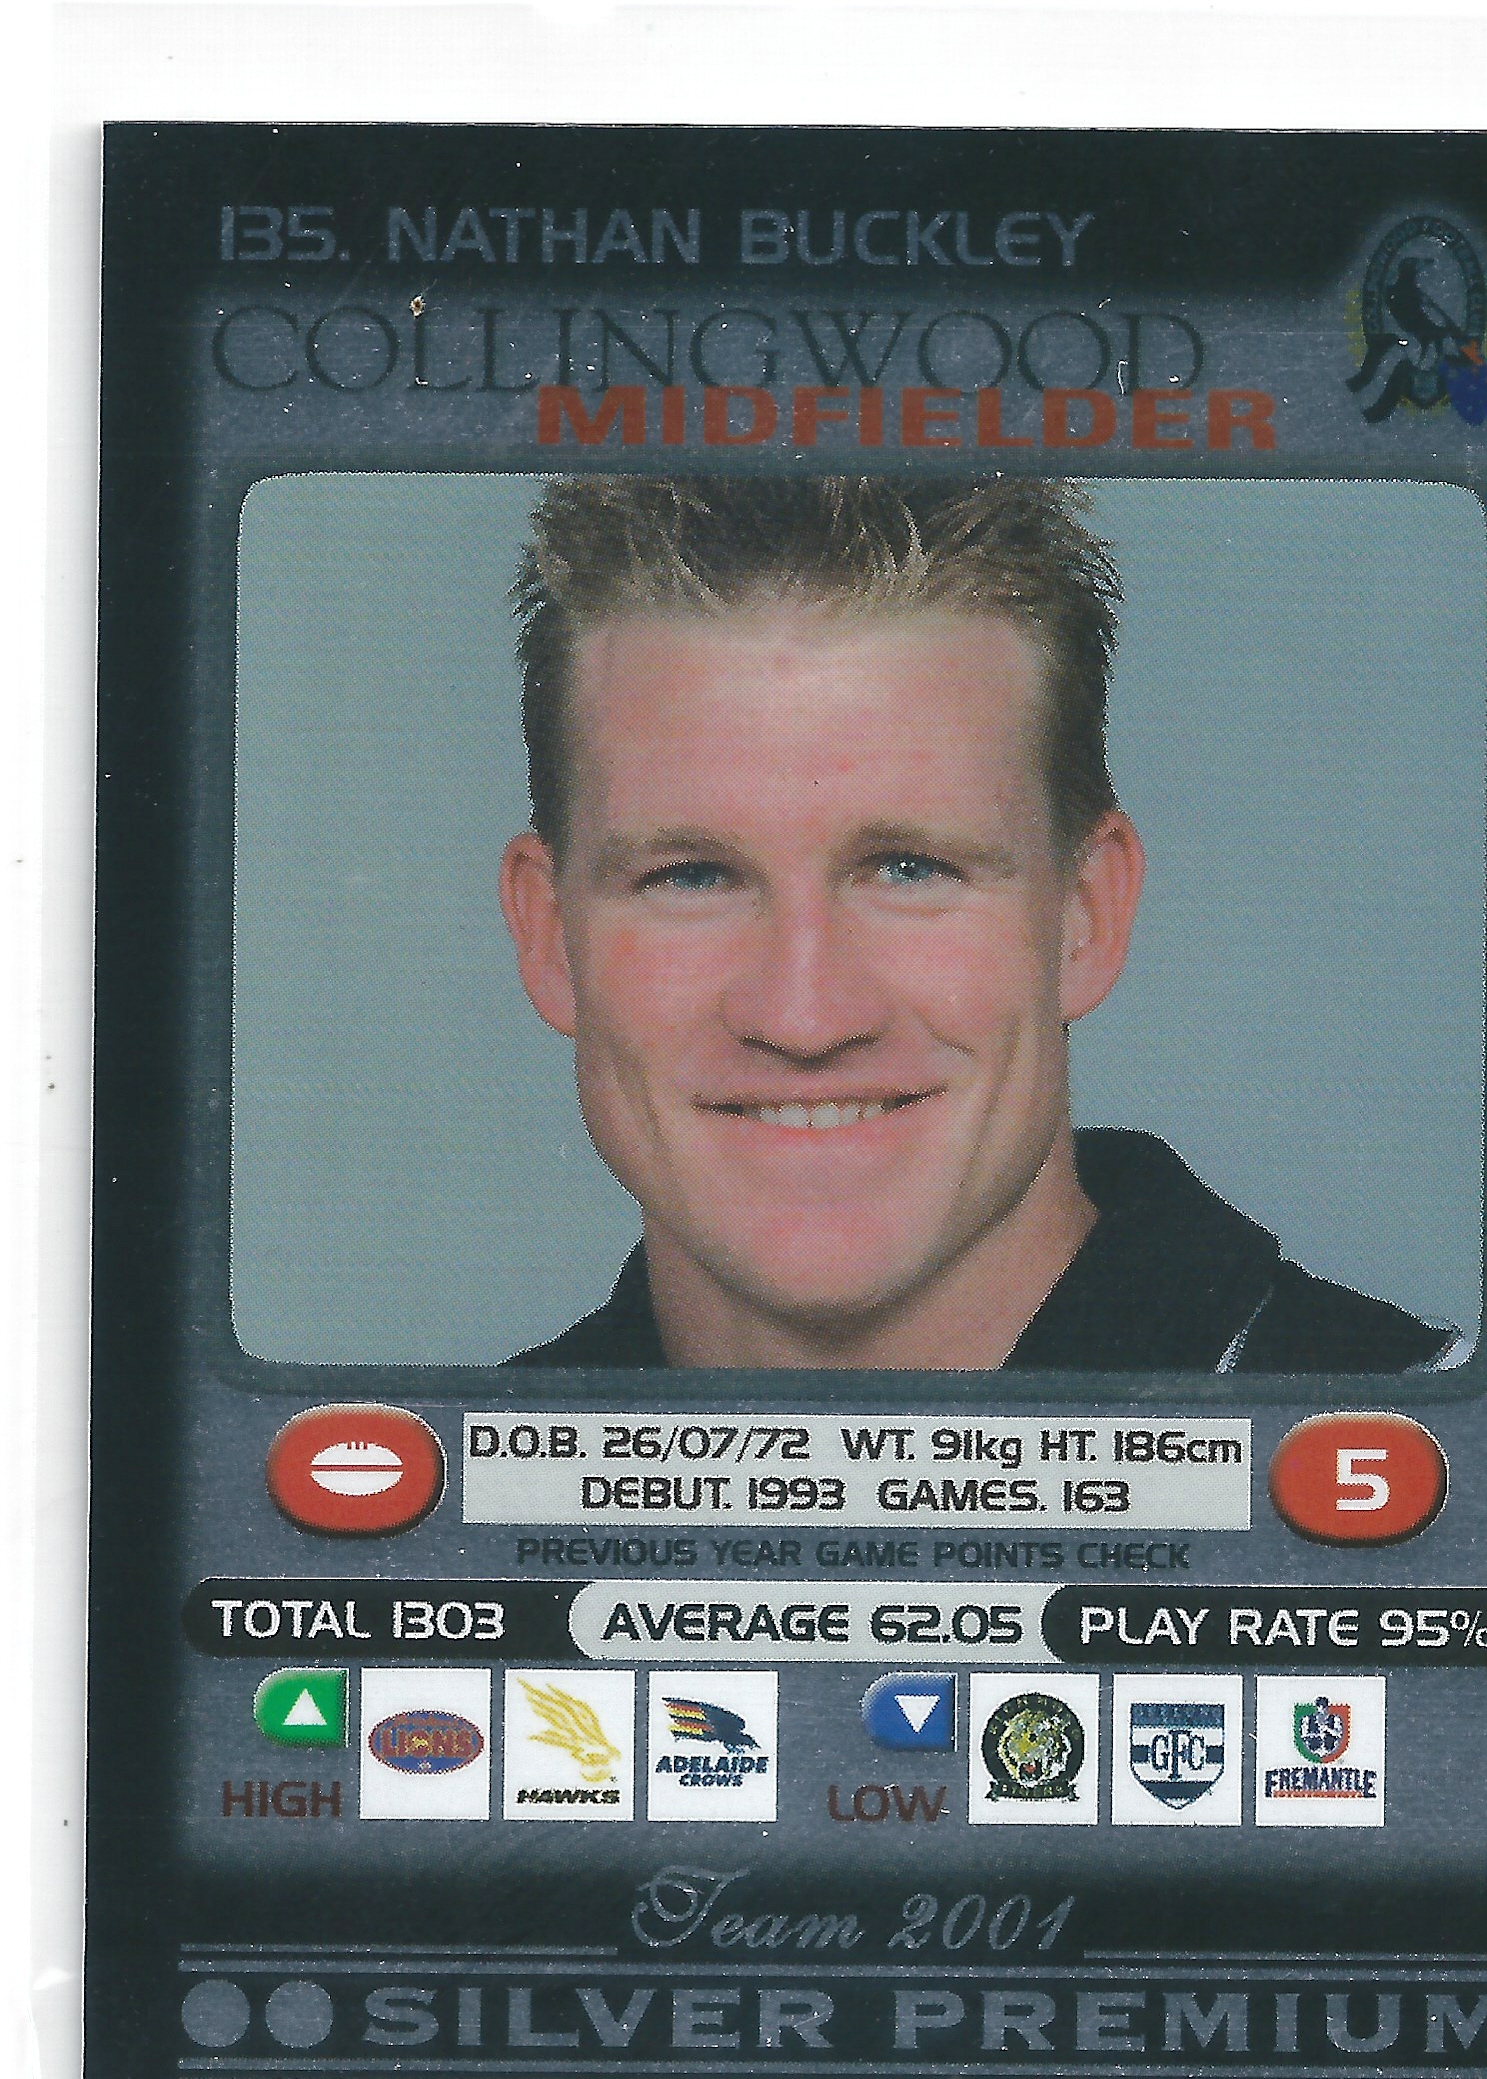 2001 Teamcoach Silver(135) Nathan Buckley Collingwood